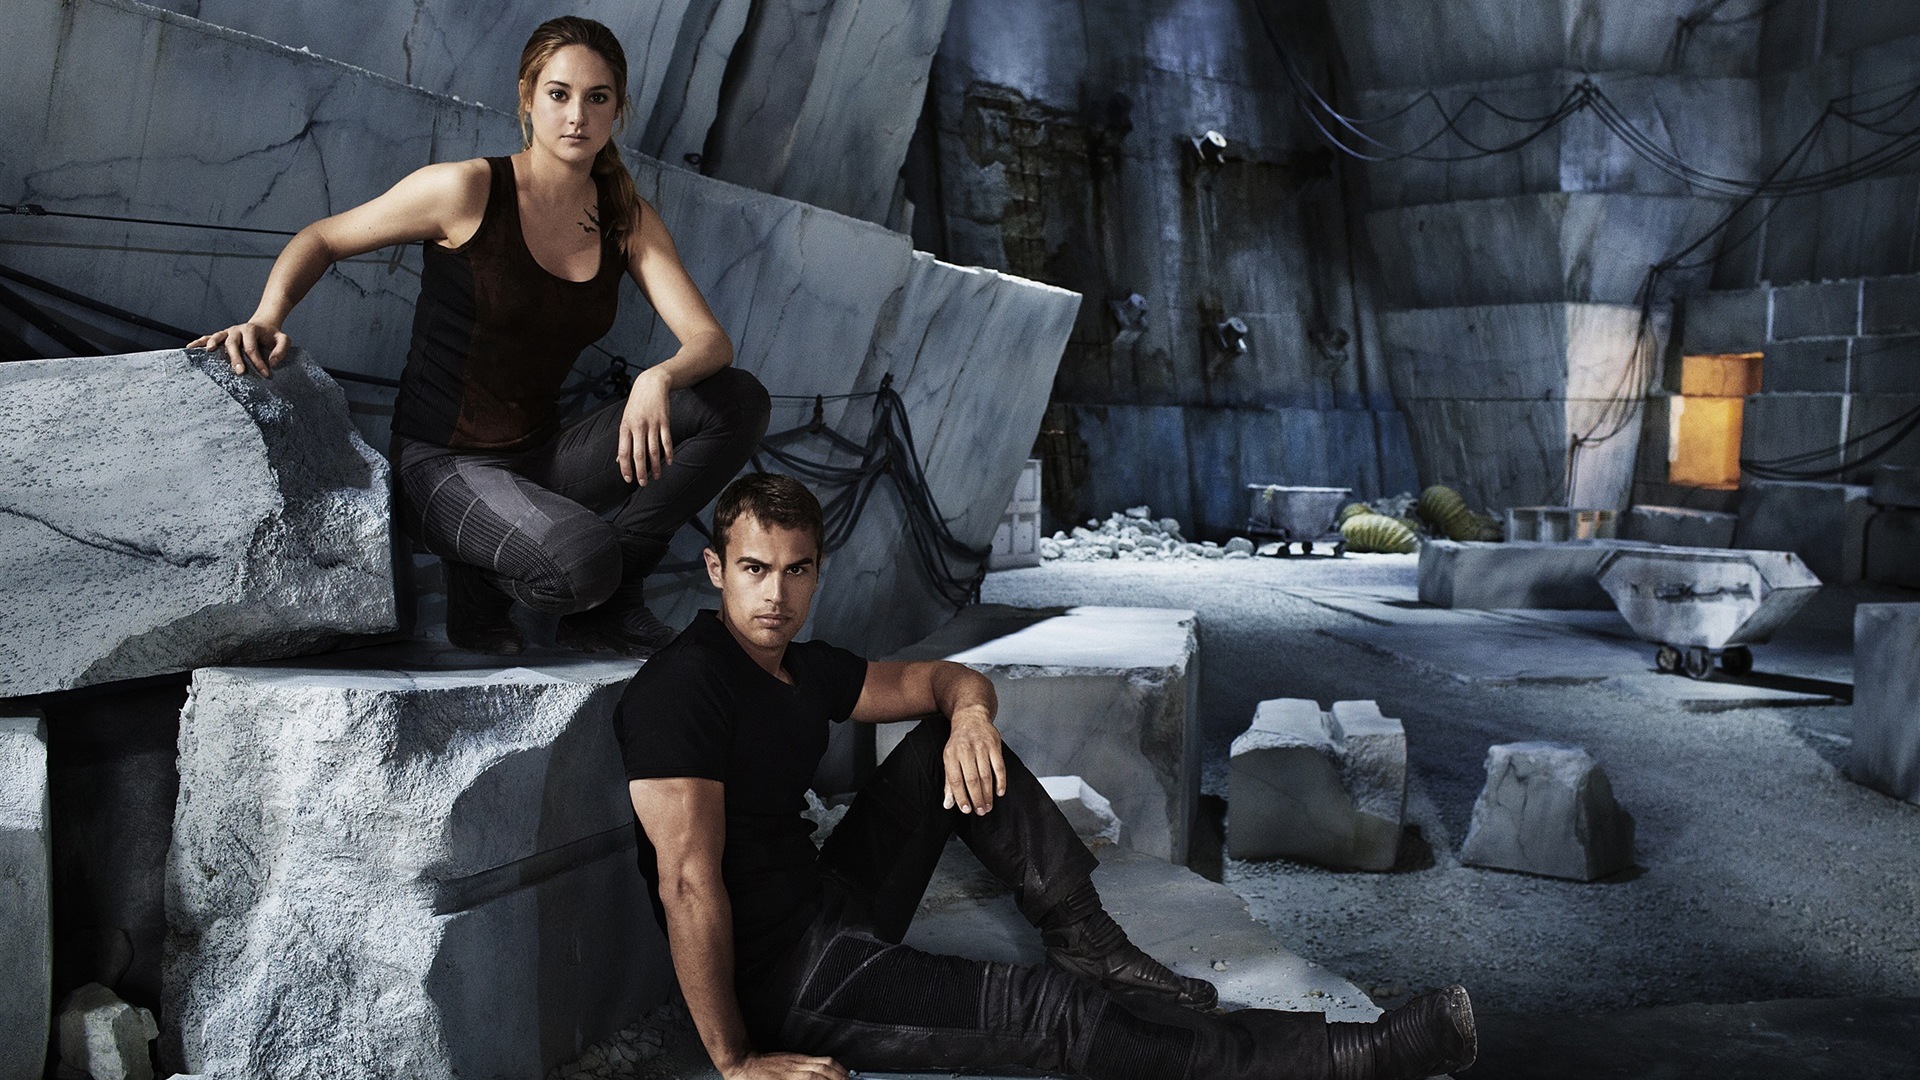 Divergent movie HD wallpapers #13 - 1920x1080